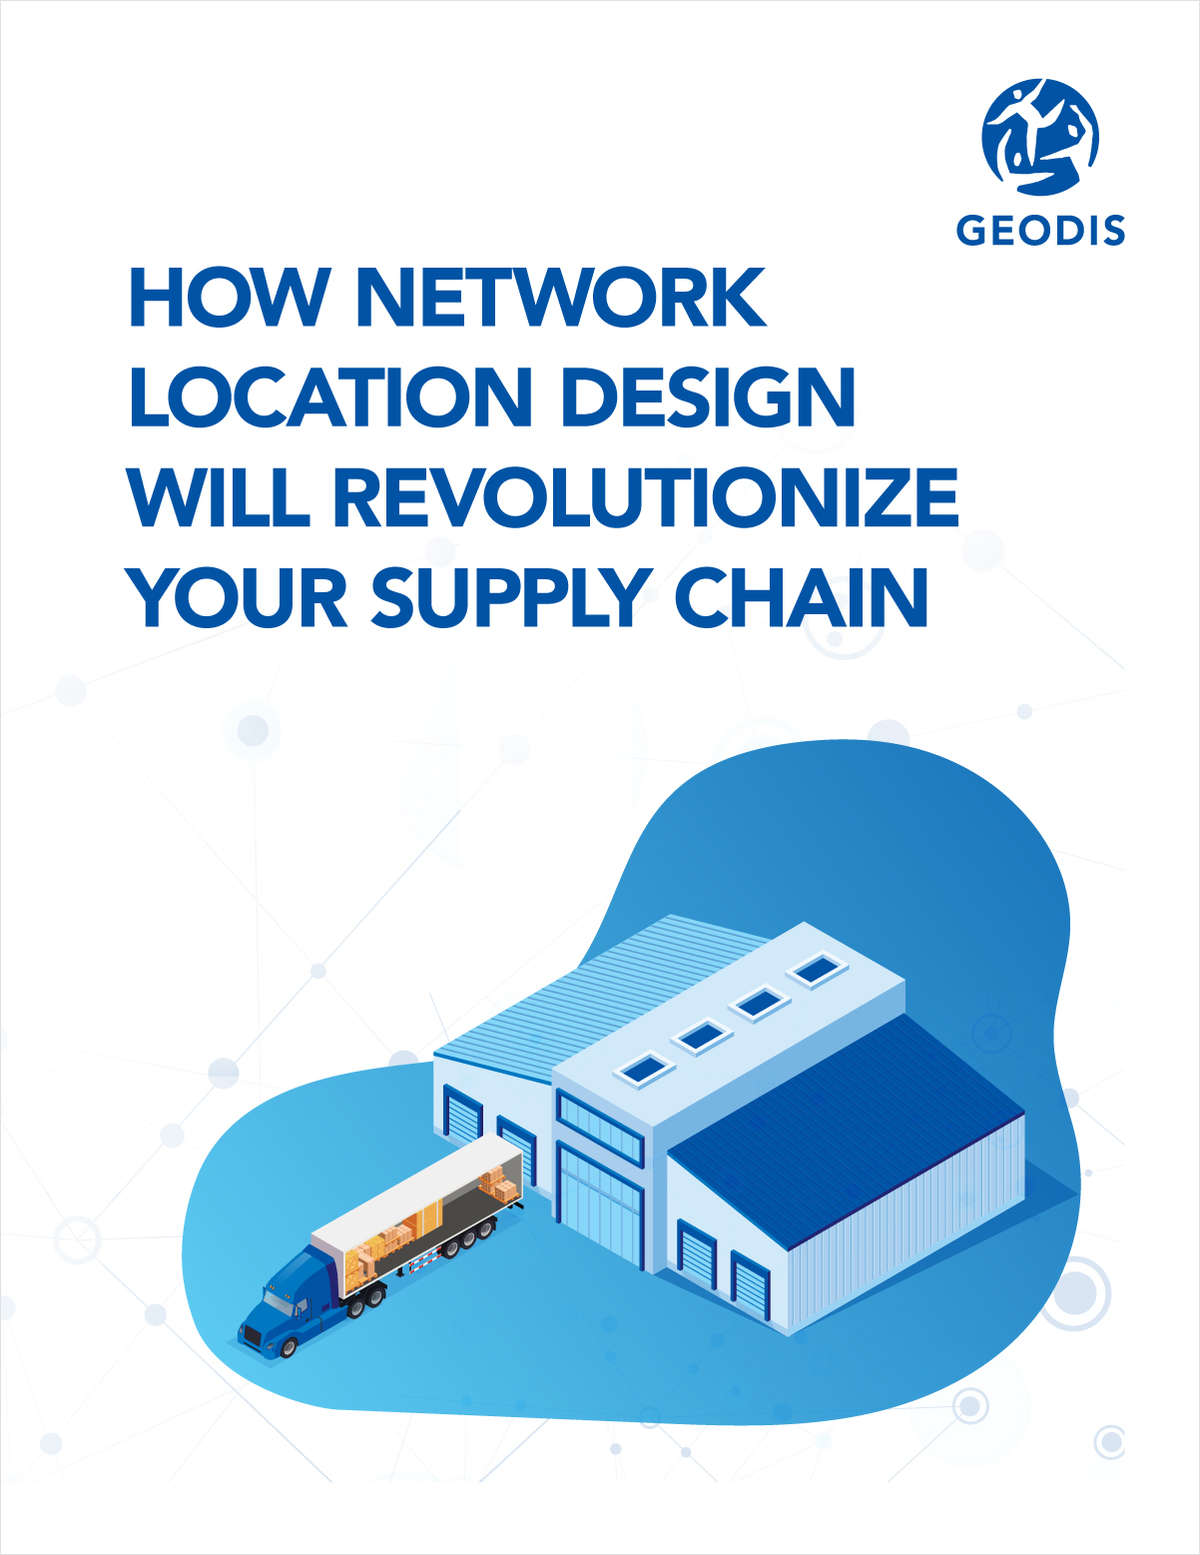 How Network Location Design Will Revolutionize Your Supply Chain